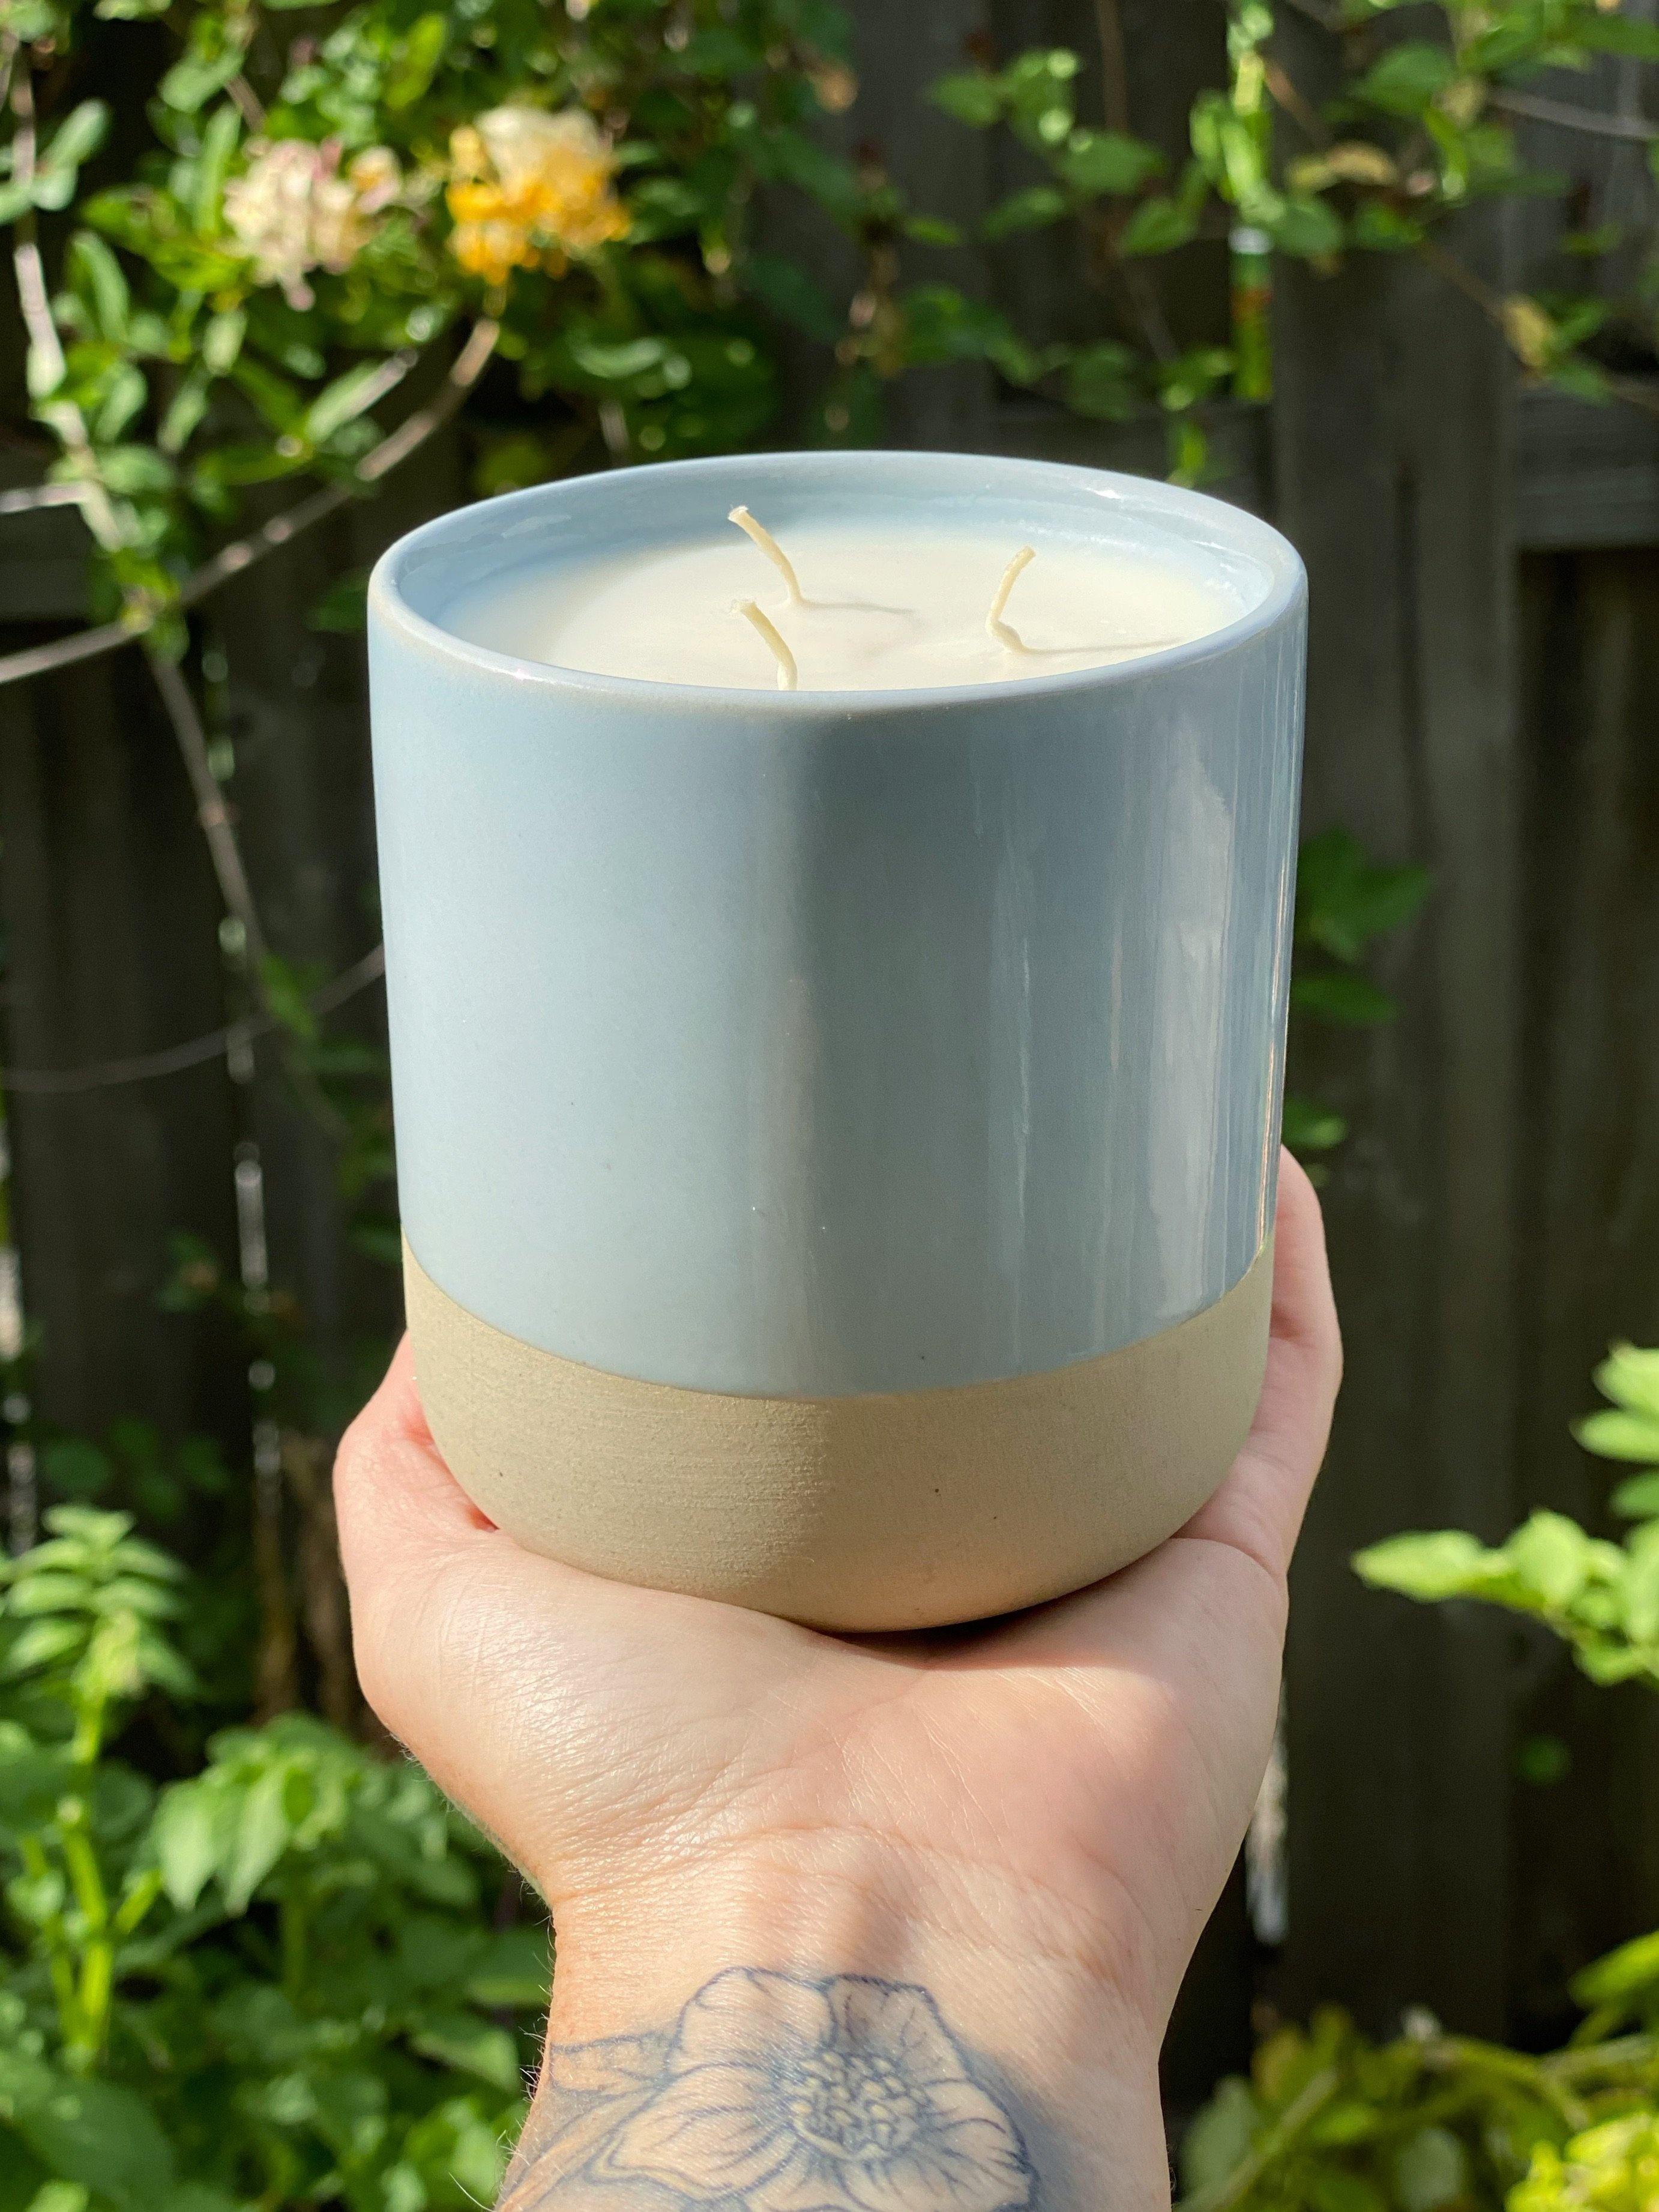 Oversized, Outdoor Ceramic Candle - Soy with Essential Oils to Stay Bug-Free - Keven Craft Rituals